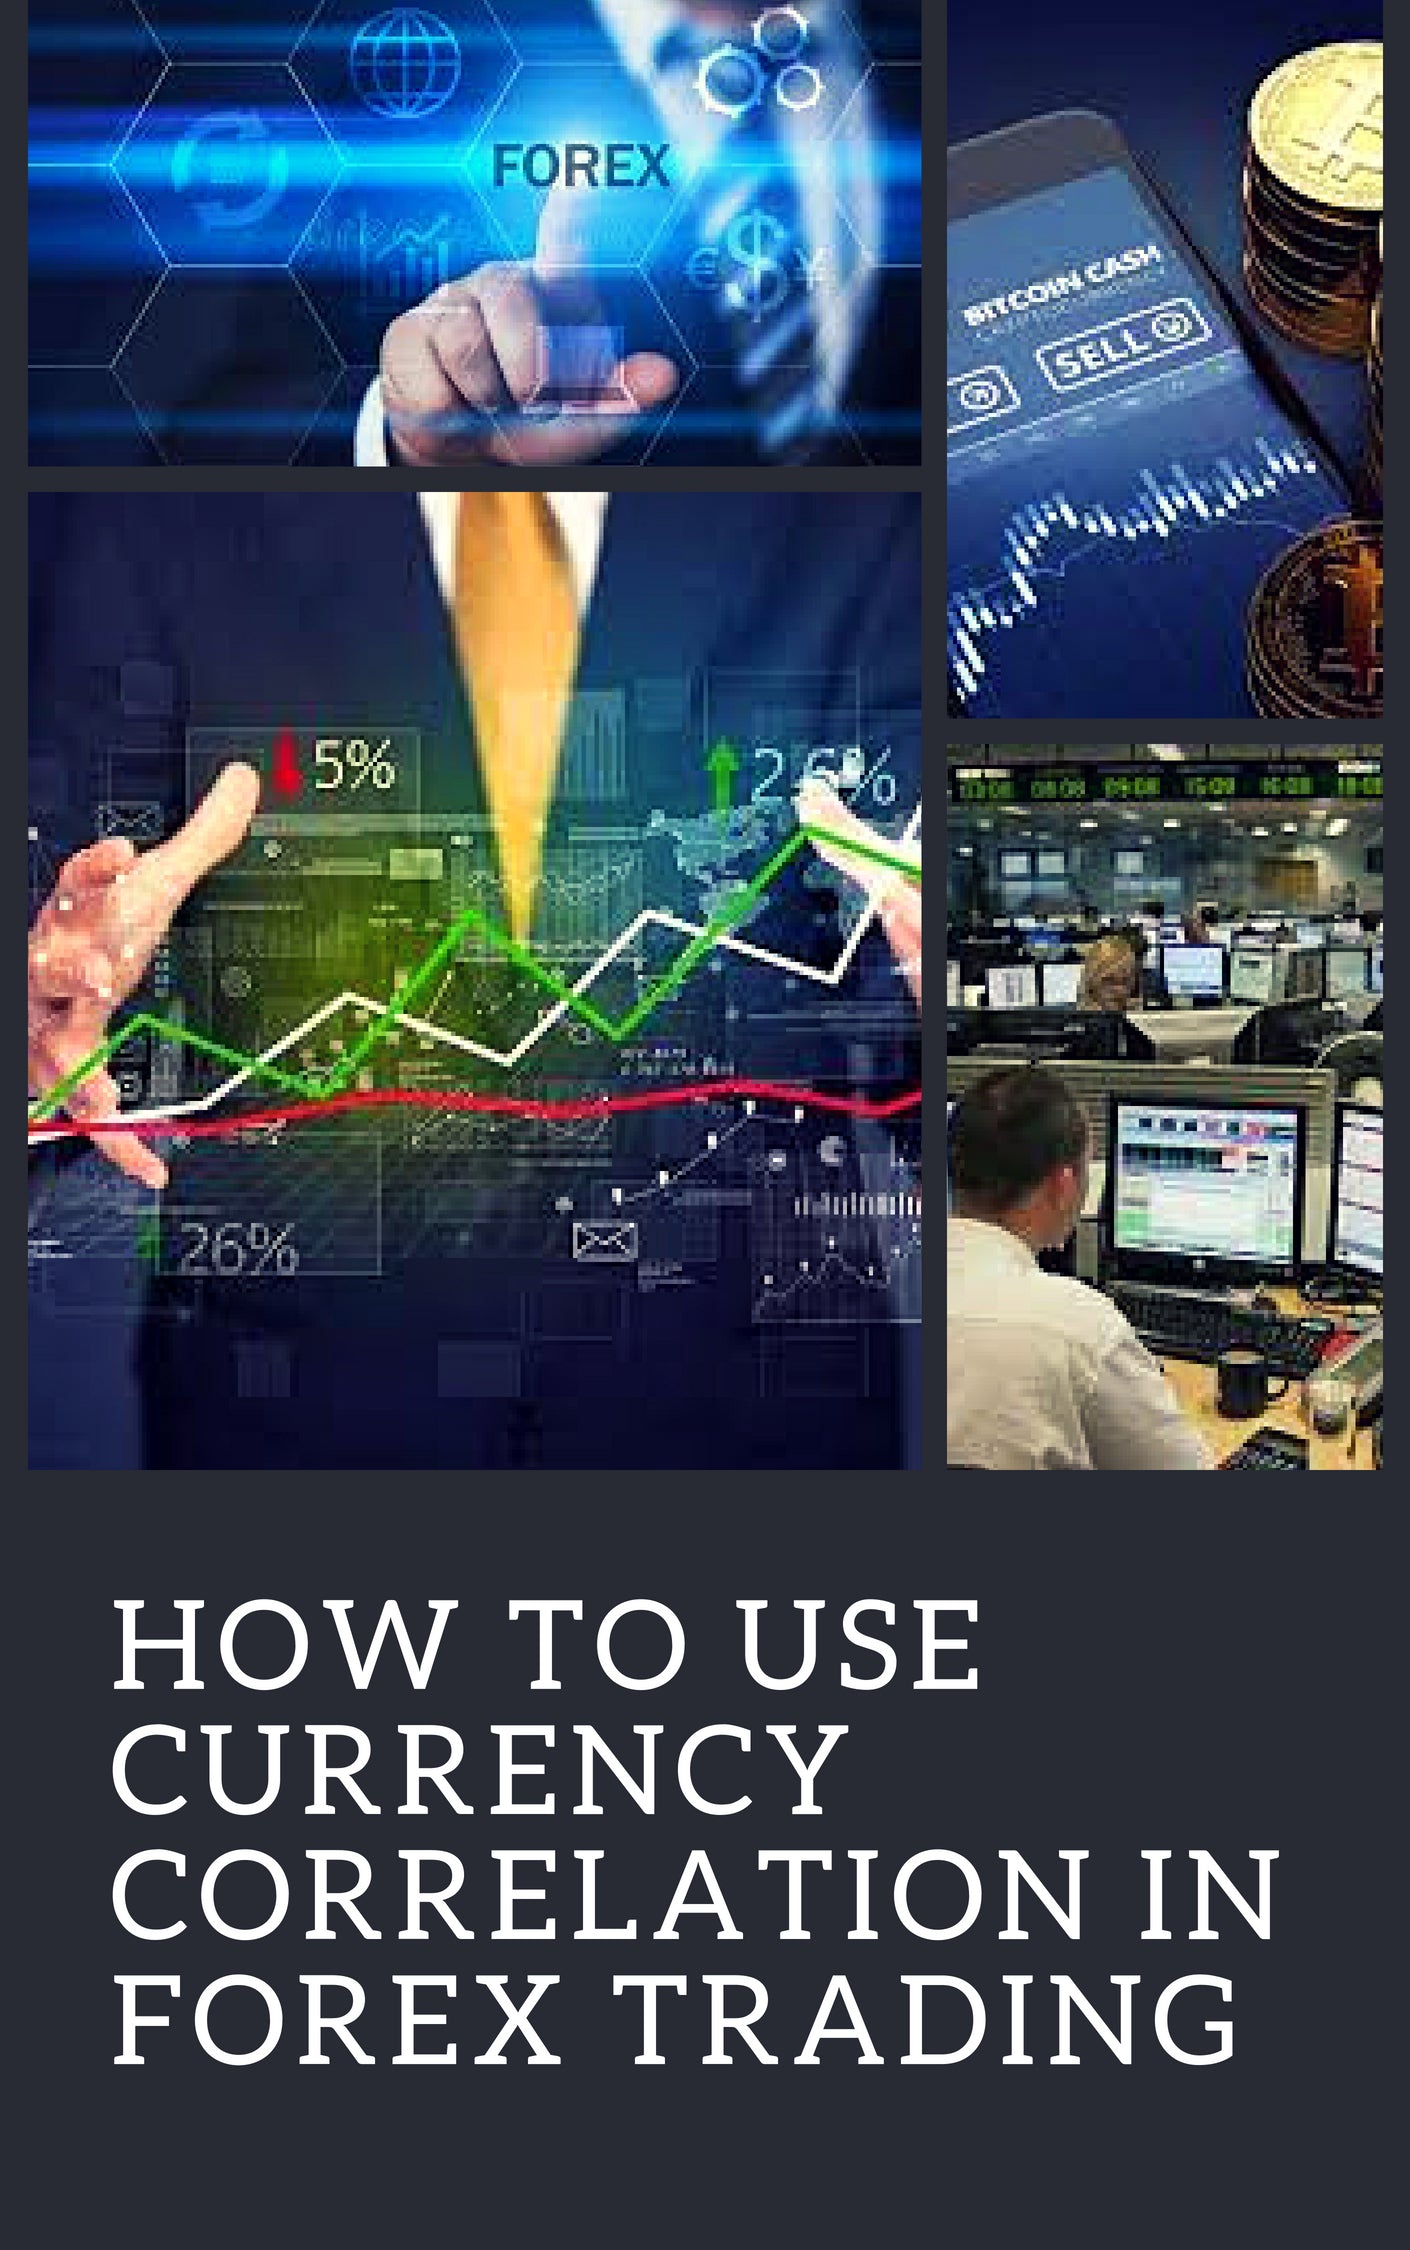 How To Use Currency Correlation In Forex Trading - 